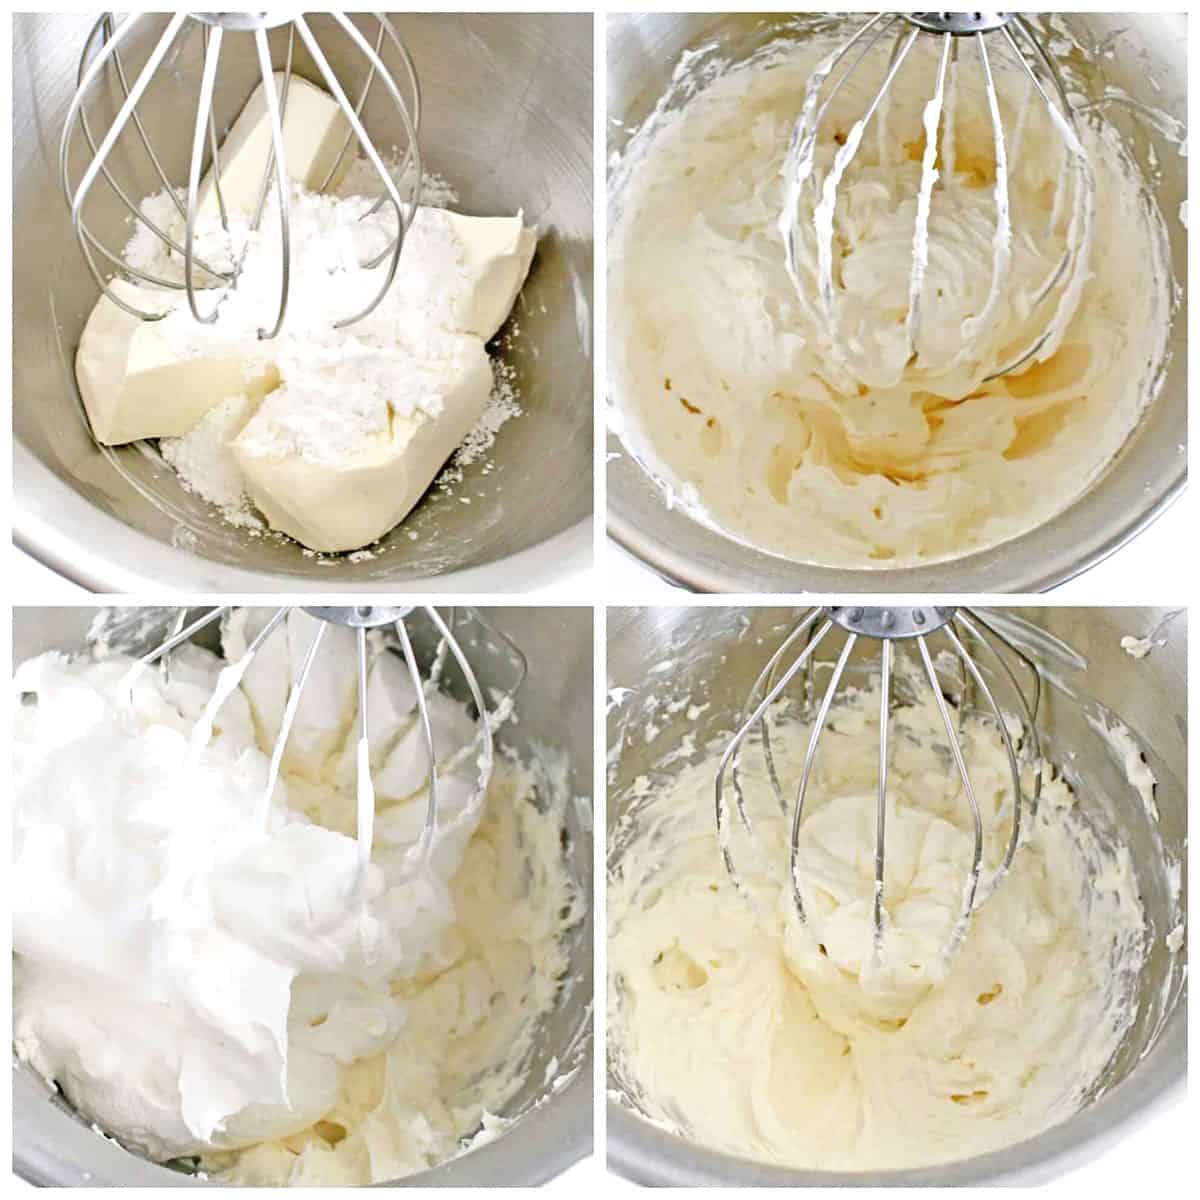 Add the whipping cream and beat it again until everything is well mixed. Scrape the sides and the bottom of the mixer bowl with a spatula and beat it for another minute.